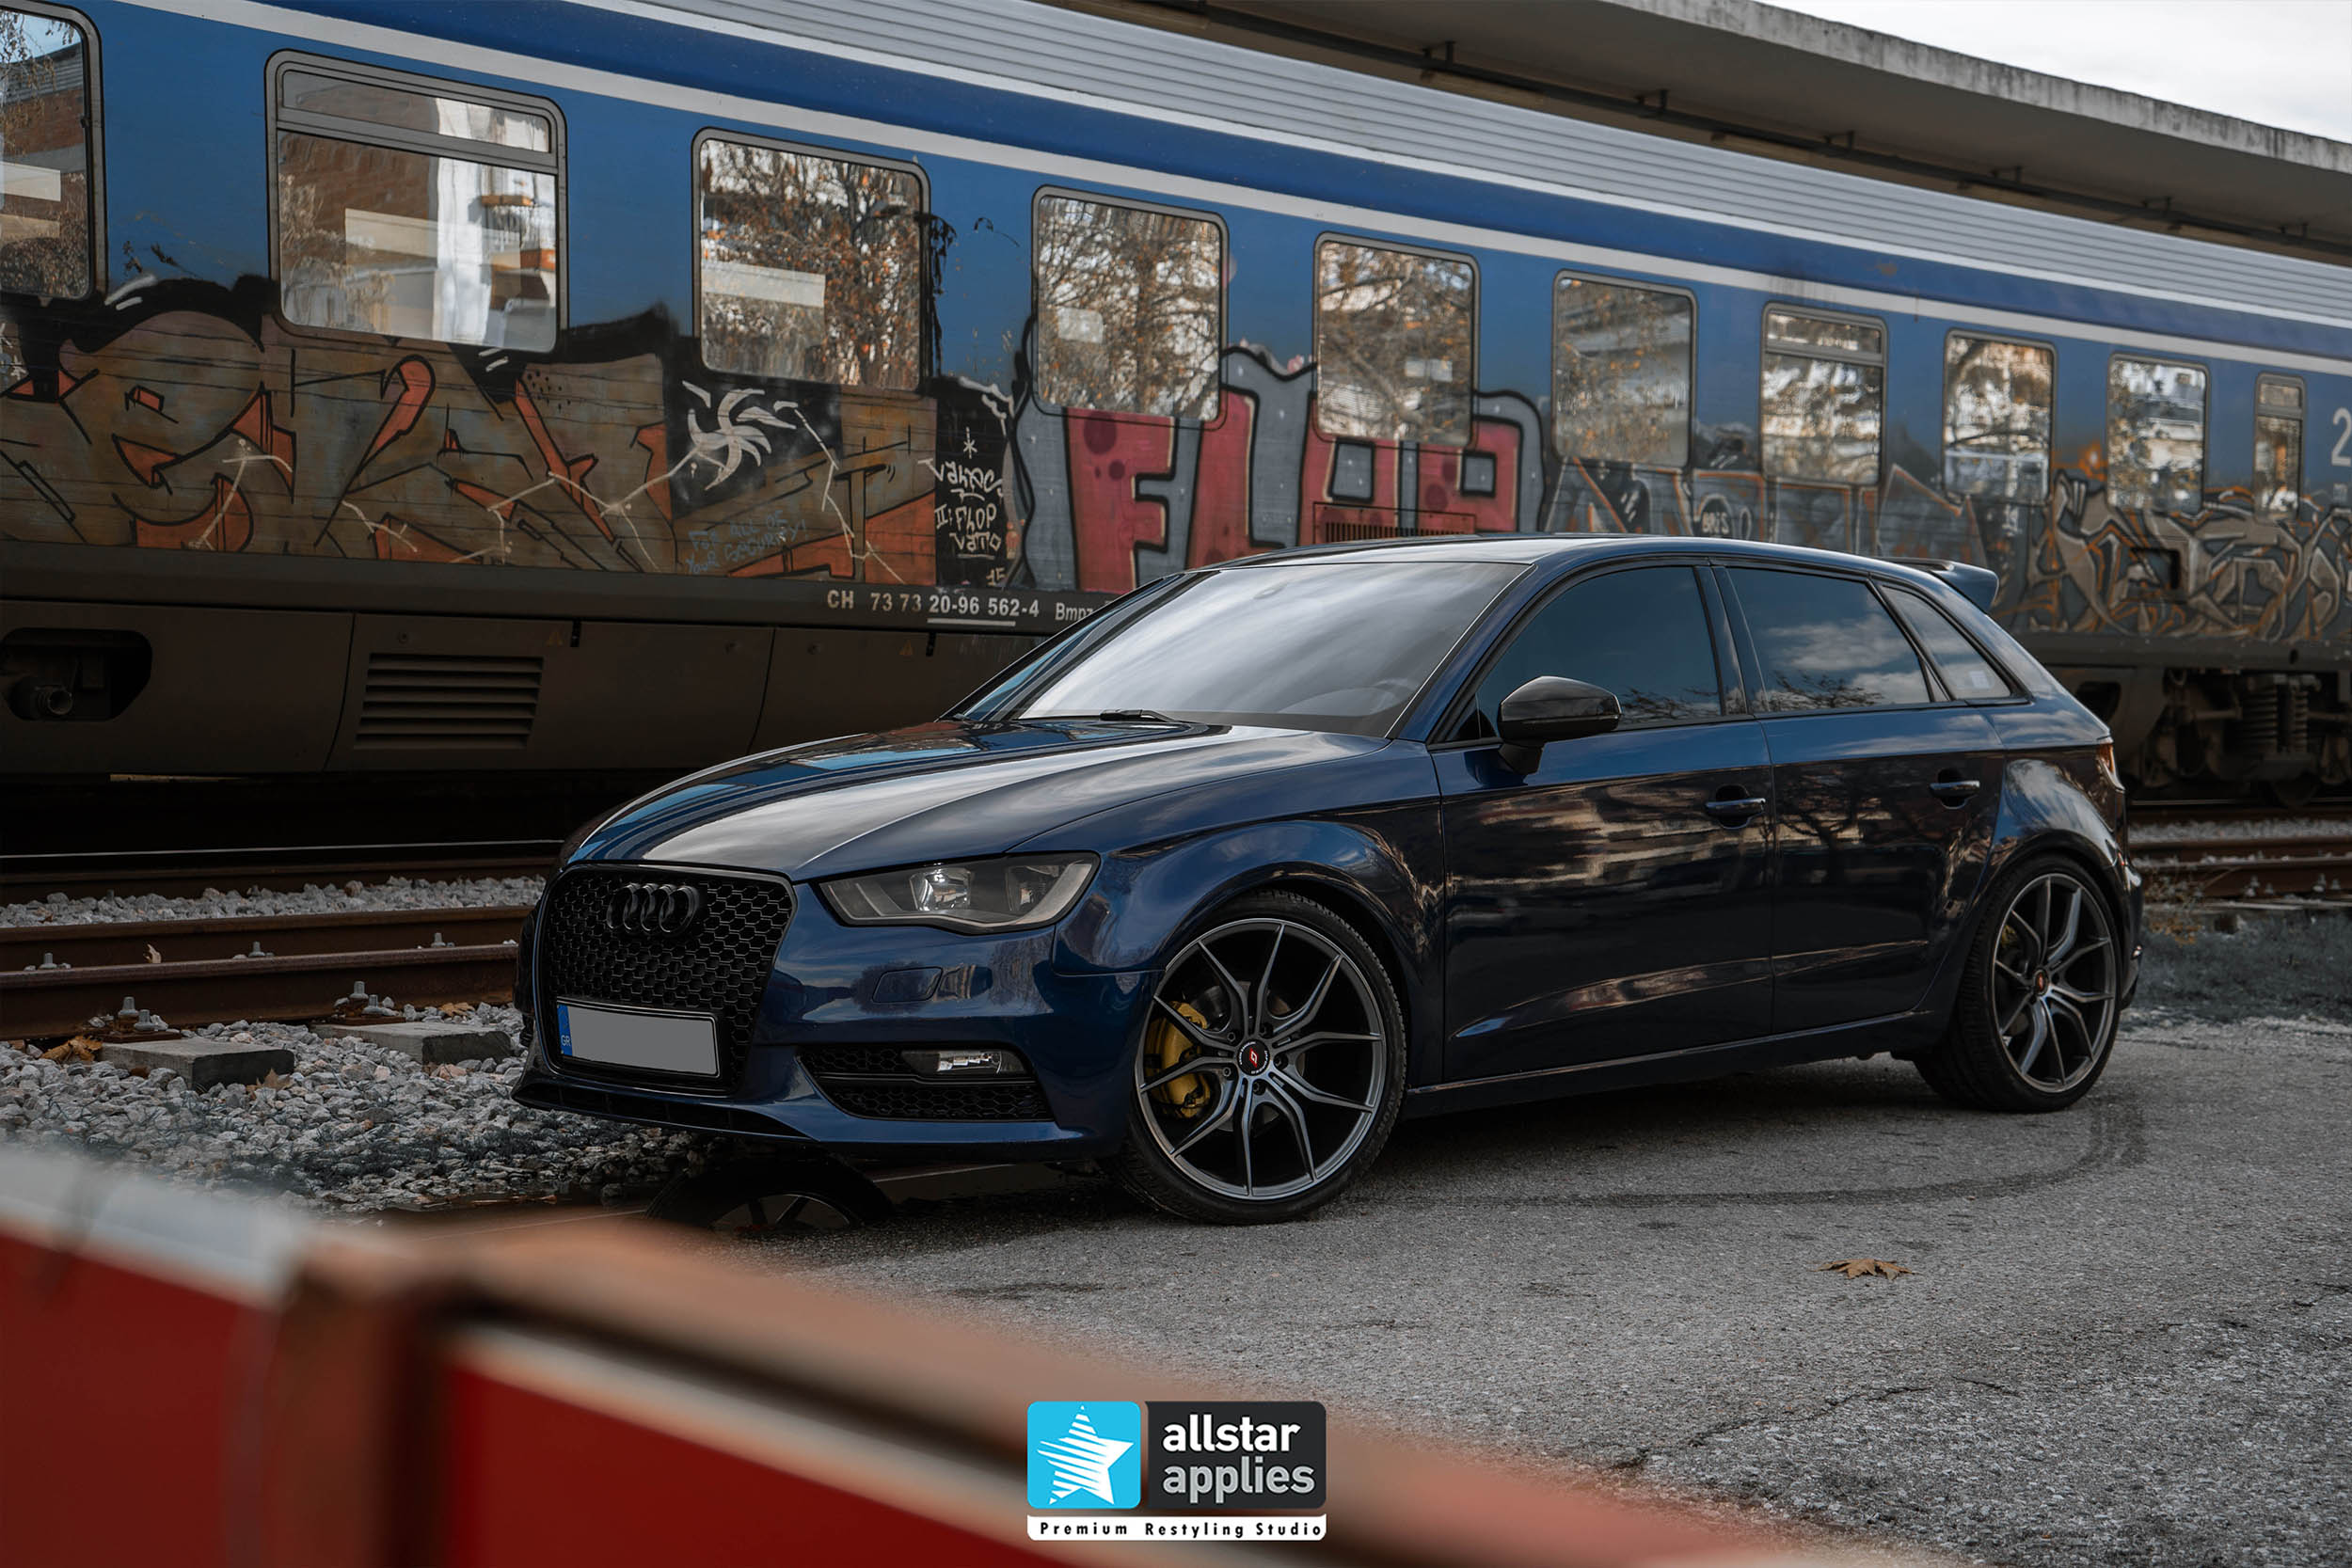 AUDI A3 INFORGED IFG17 SITE 9